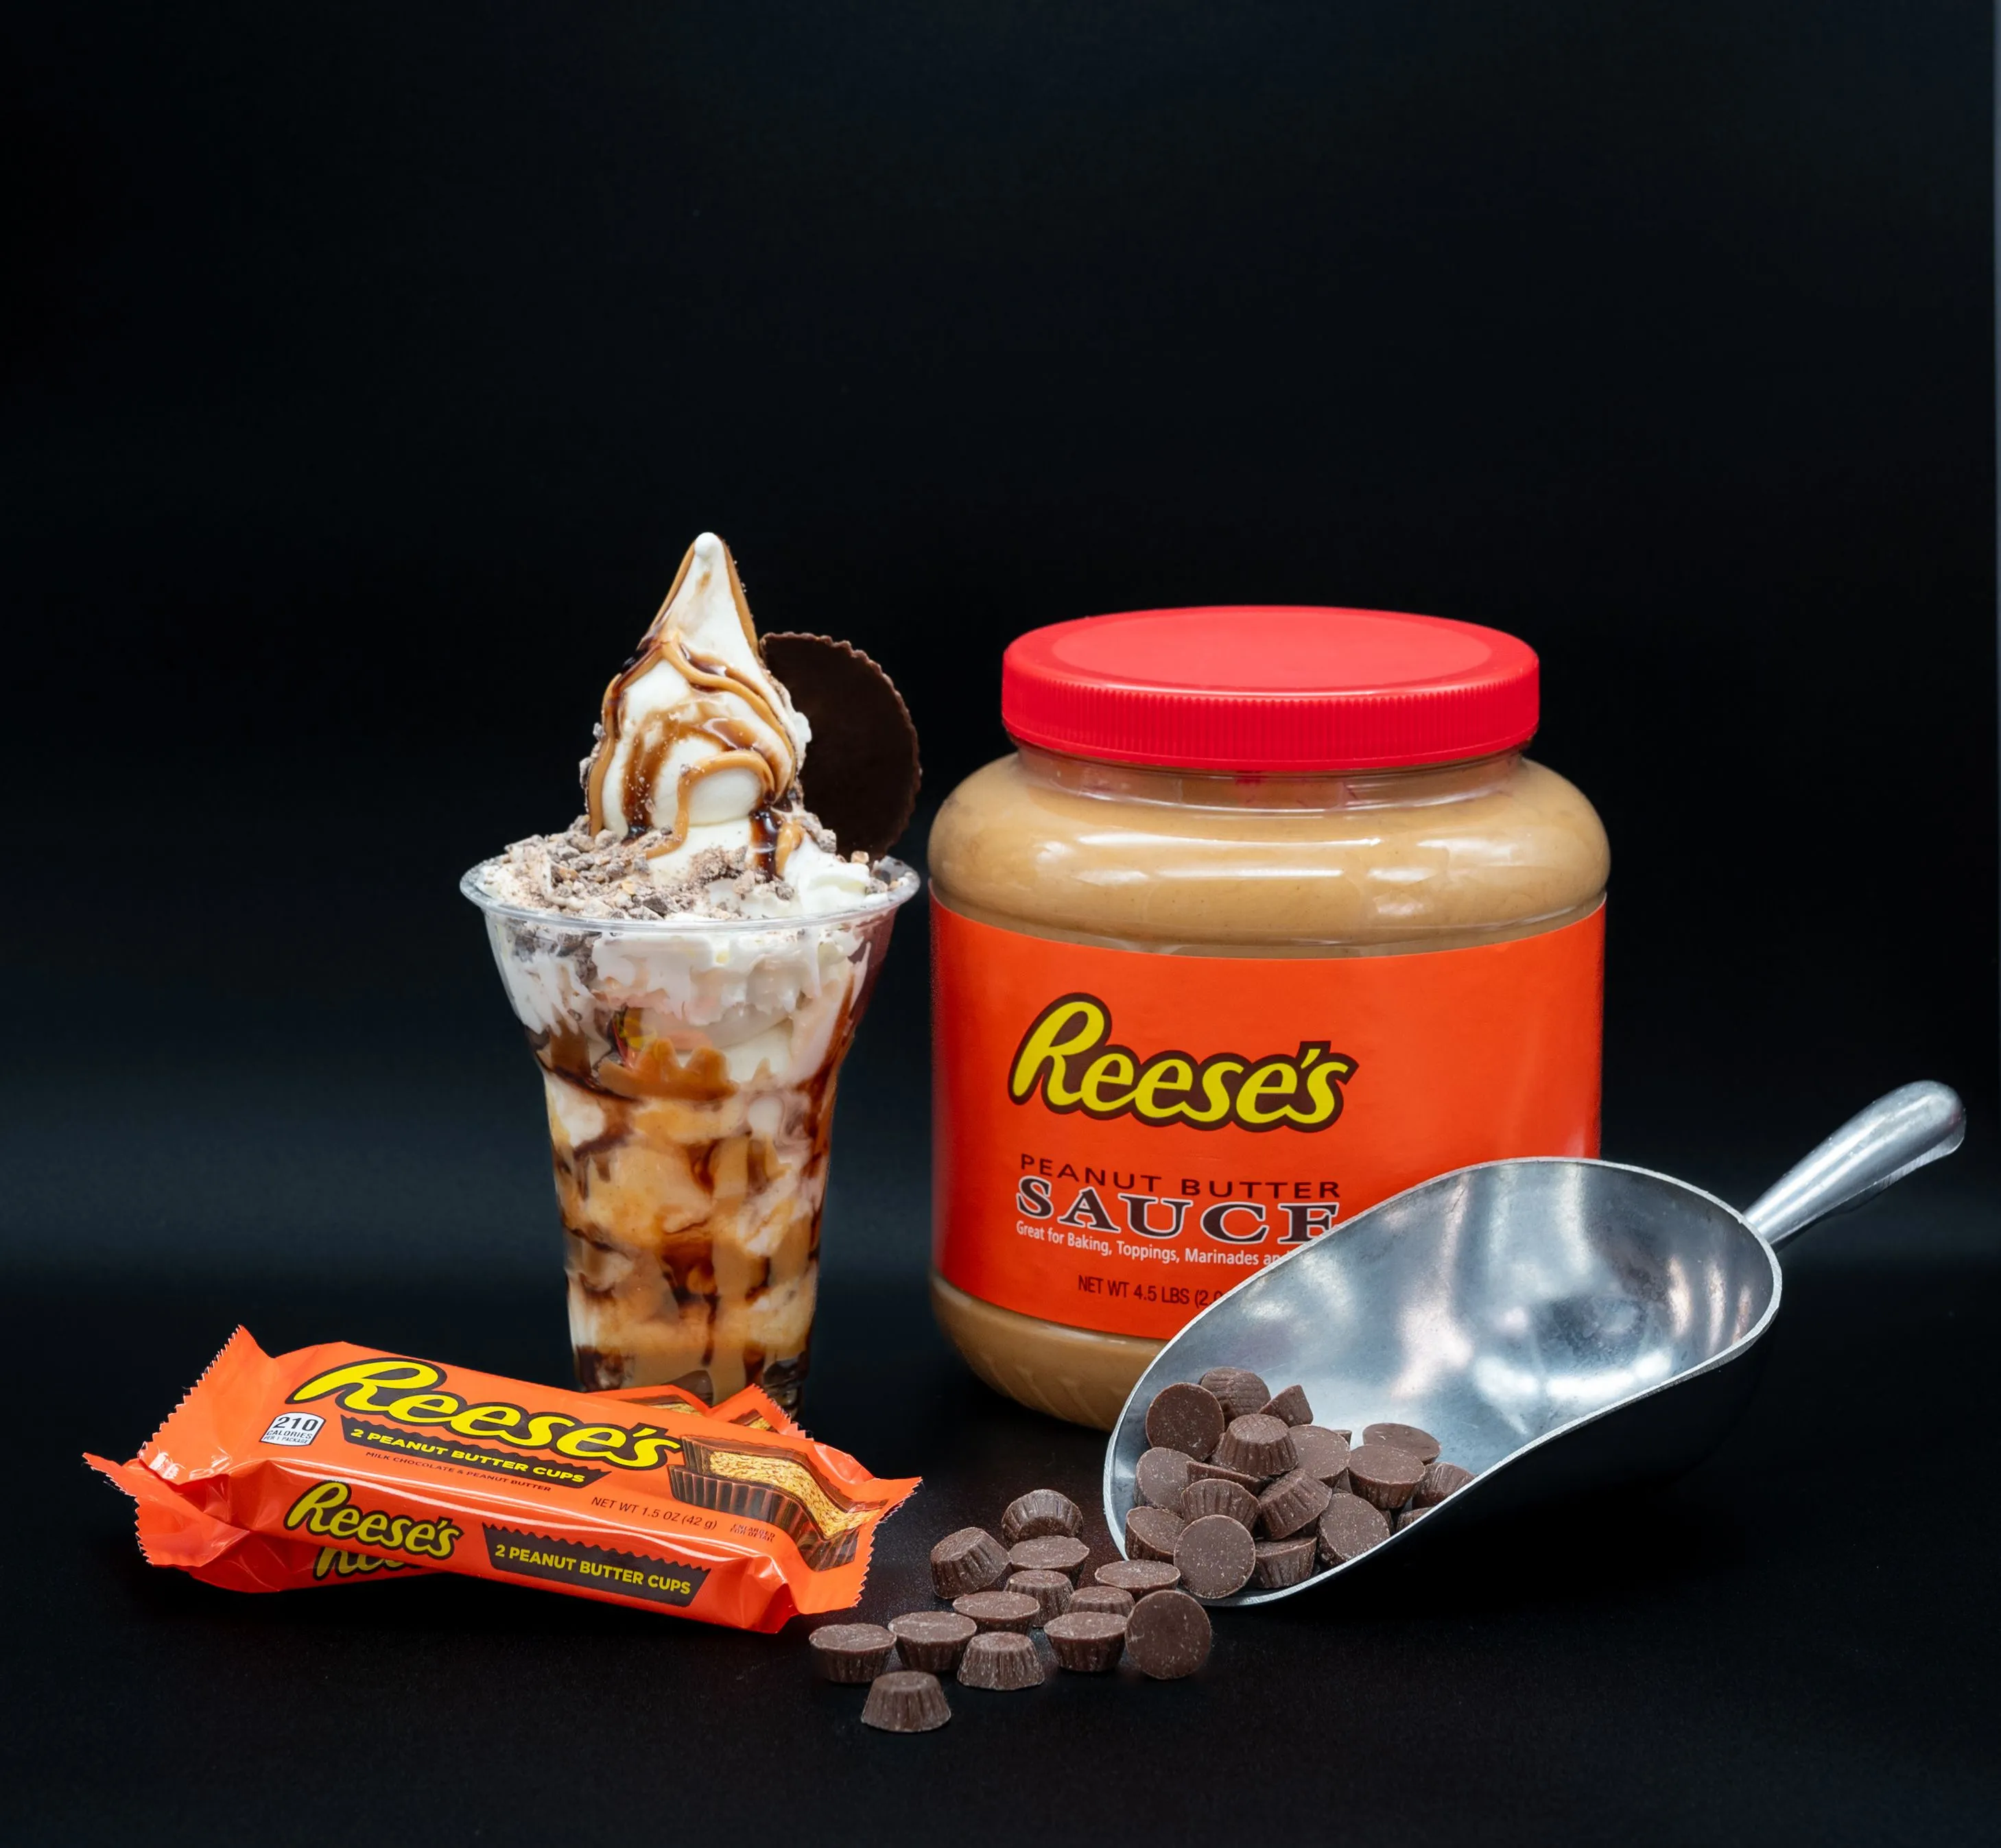 Reese's branded products including a peanut butter cup, peanut butter sauce jar, sundae with whipped cream, chocolate syrup, and a chocolate cookie, chocolate chips, and a metal scooping spoon against a black background.